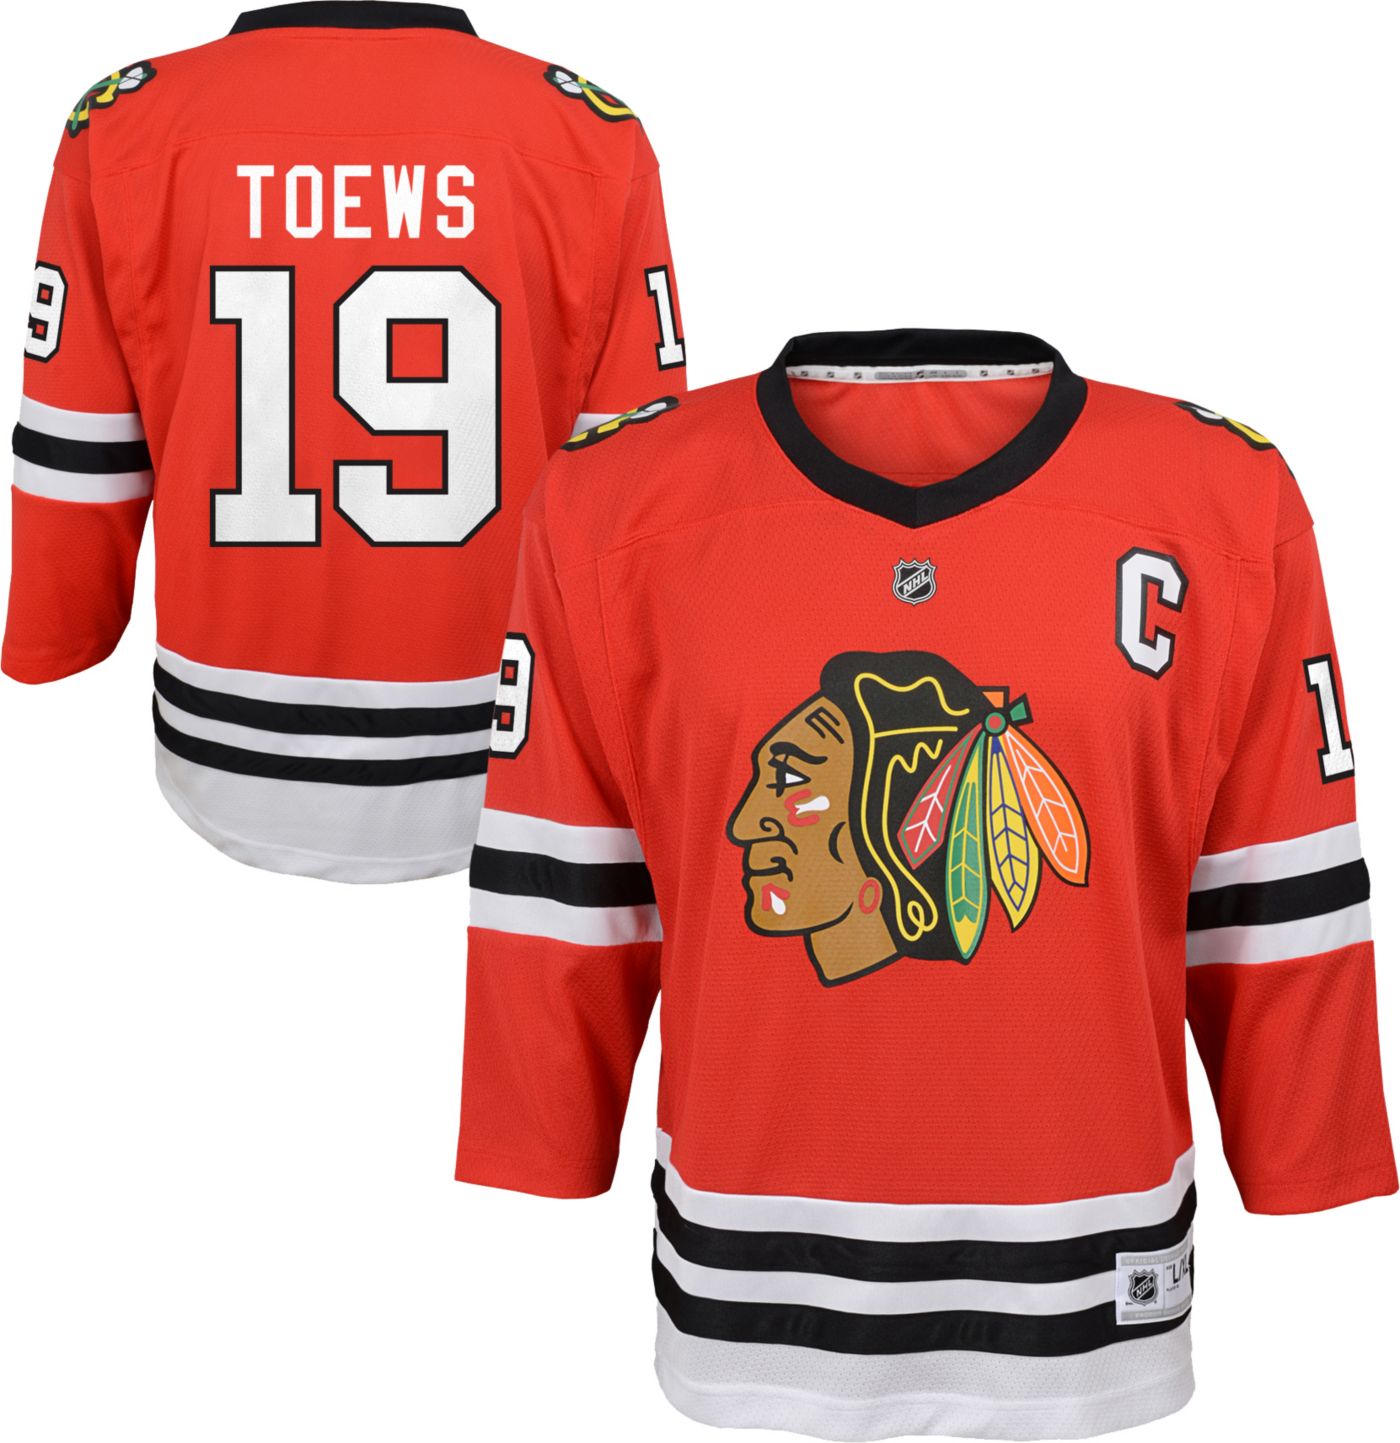 NHL Youth Chicago Blackhawks Jonathan Toews #19 Replica Home Jersey   DICK'S Sporting ...